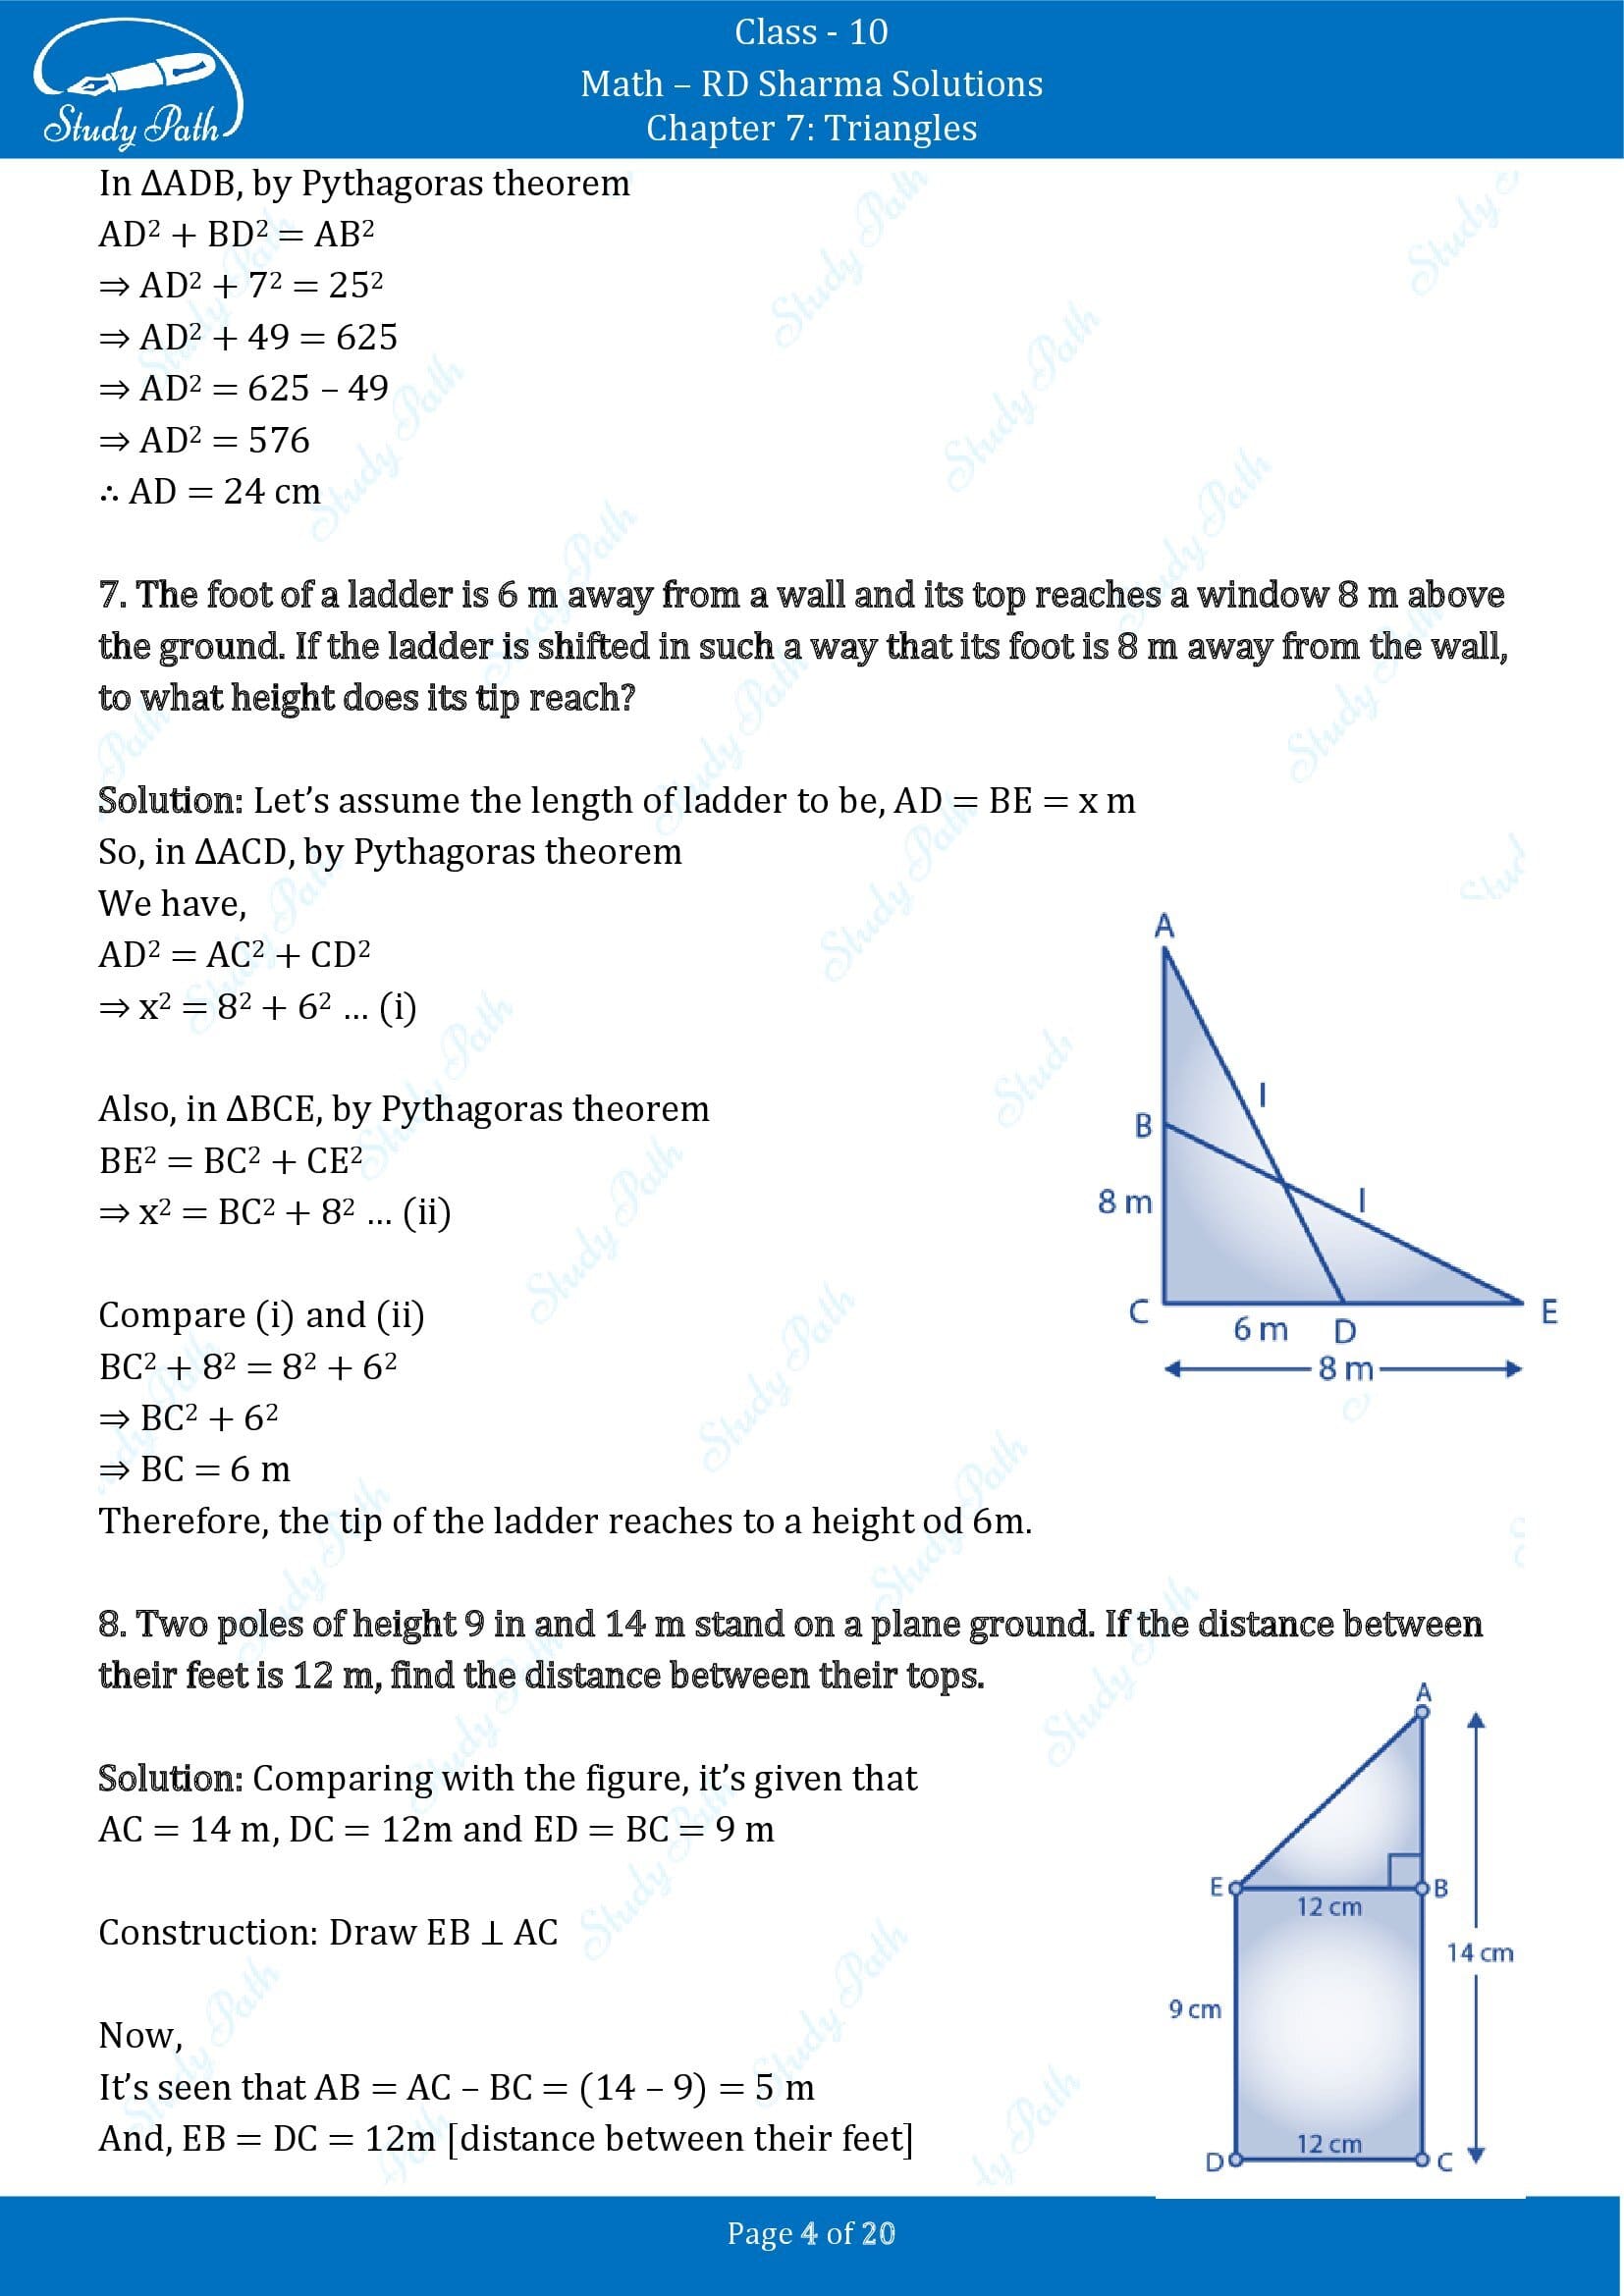 RD Sharma Solutions Class 10 Chapter 7 Triangles Exercise 7.7 00004